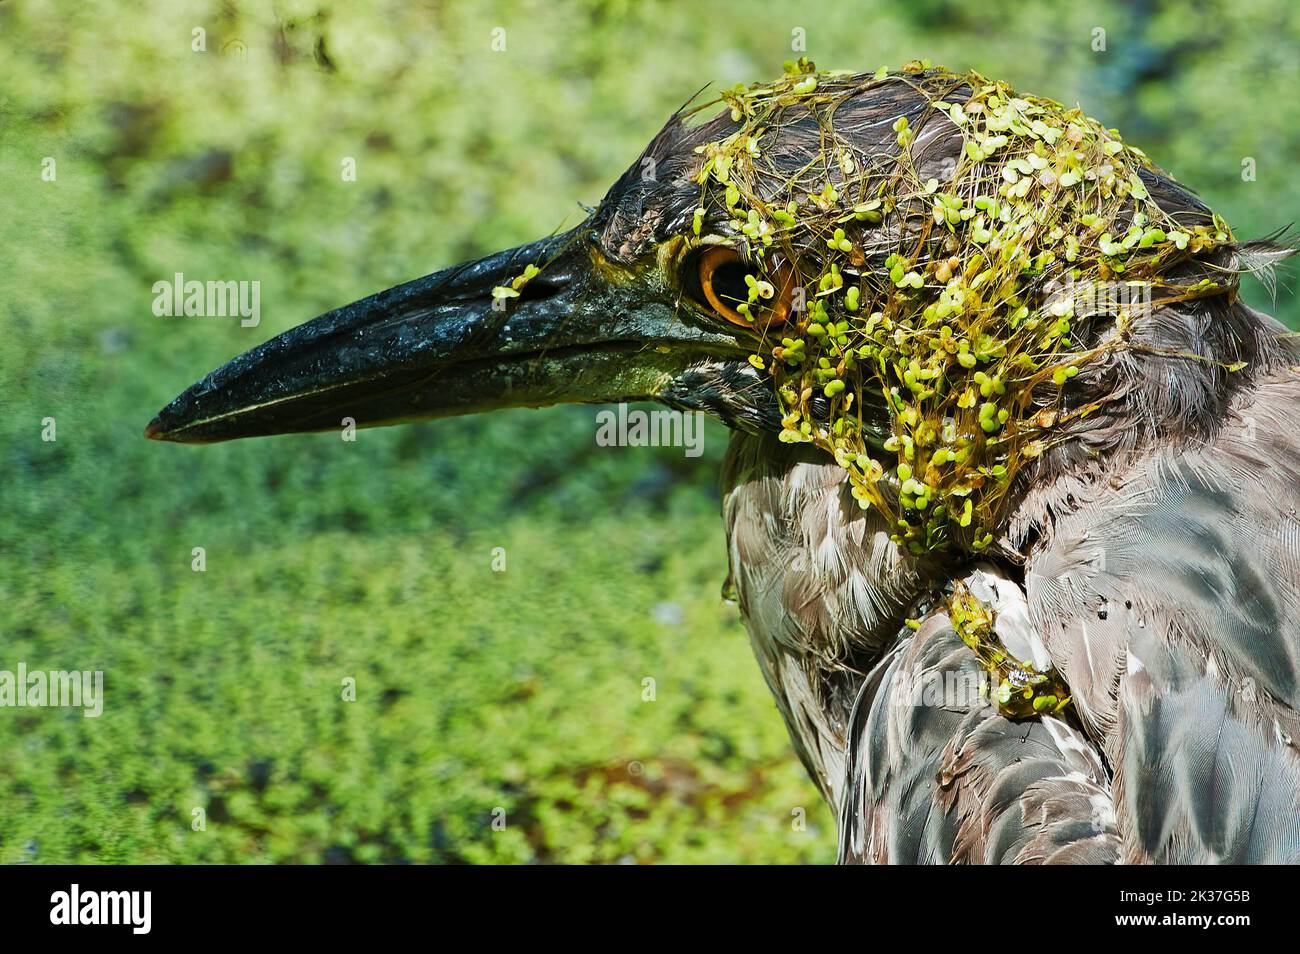 Juvenile yellow-crowned night heron covered in duckweed Stock Photo